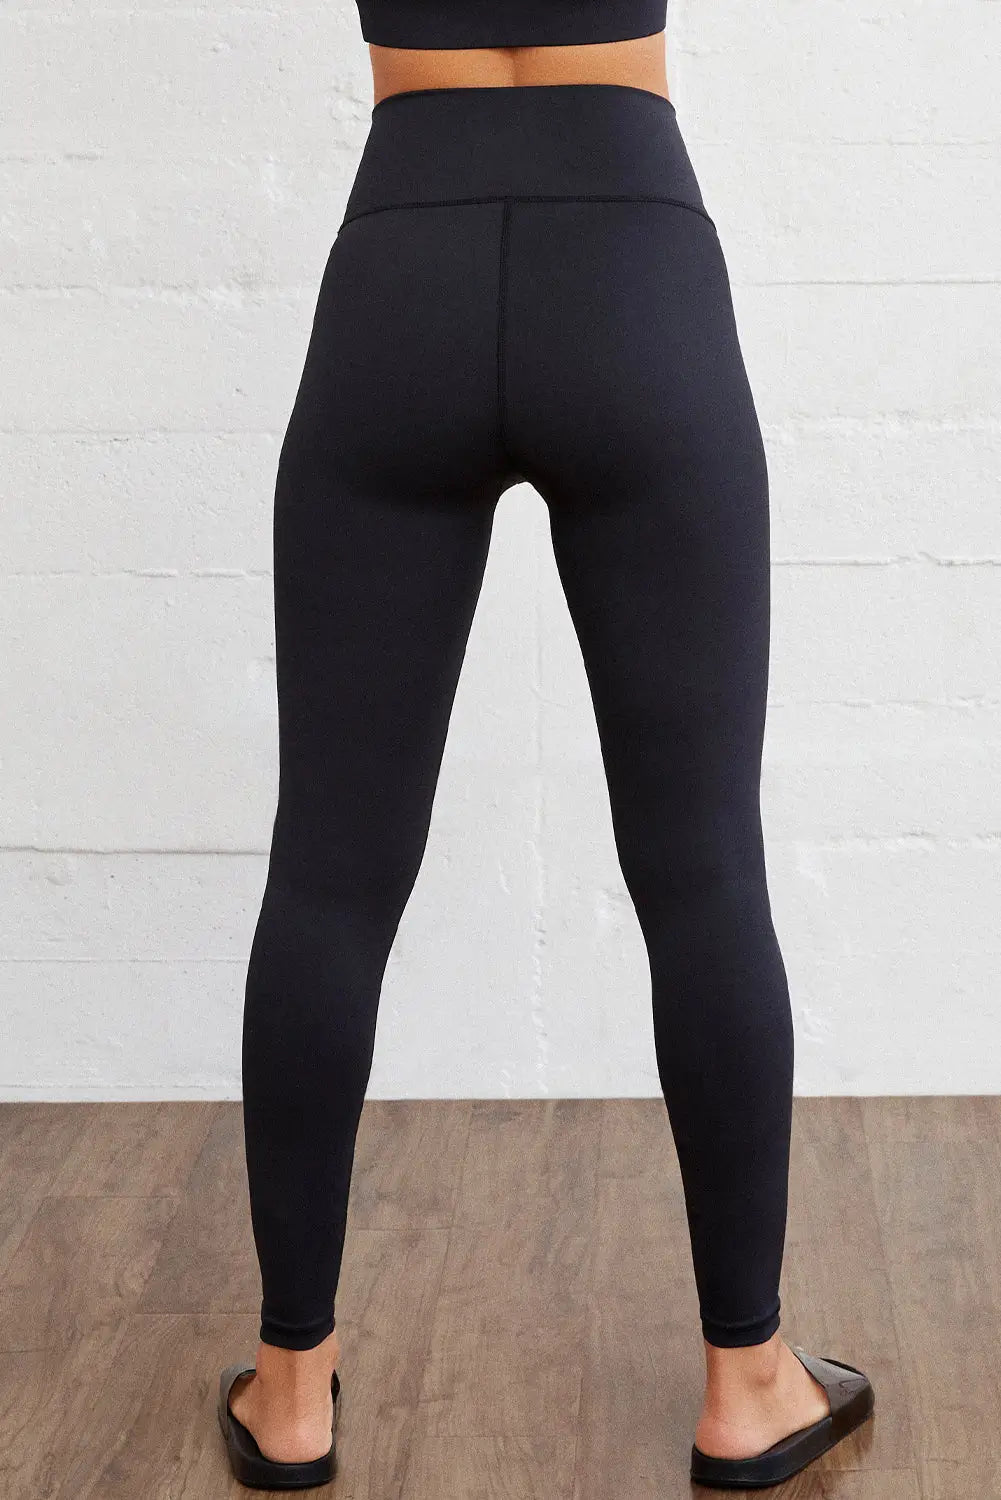 Black Arched Waist Seamless Active Leggings - Activewear